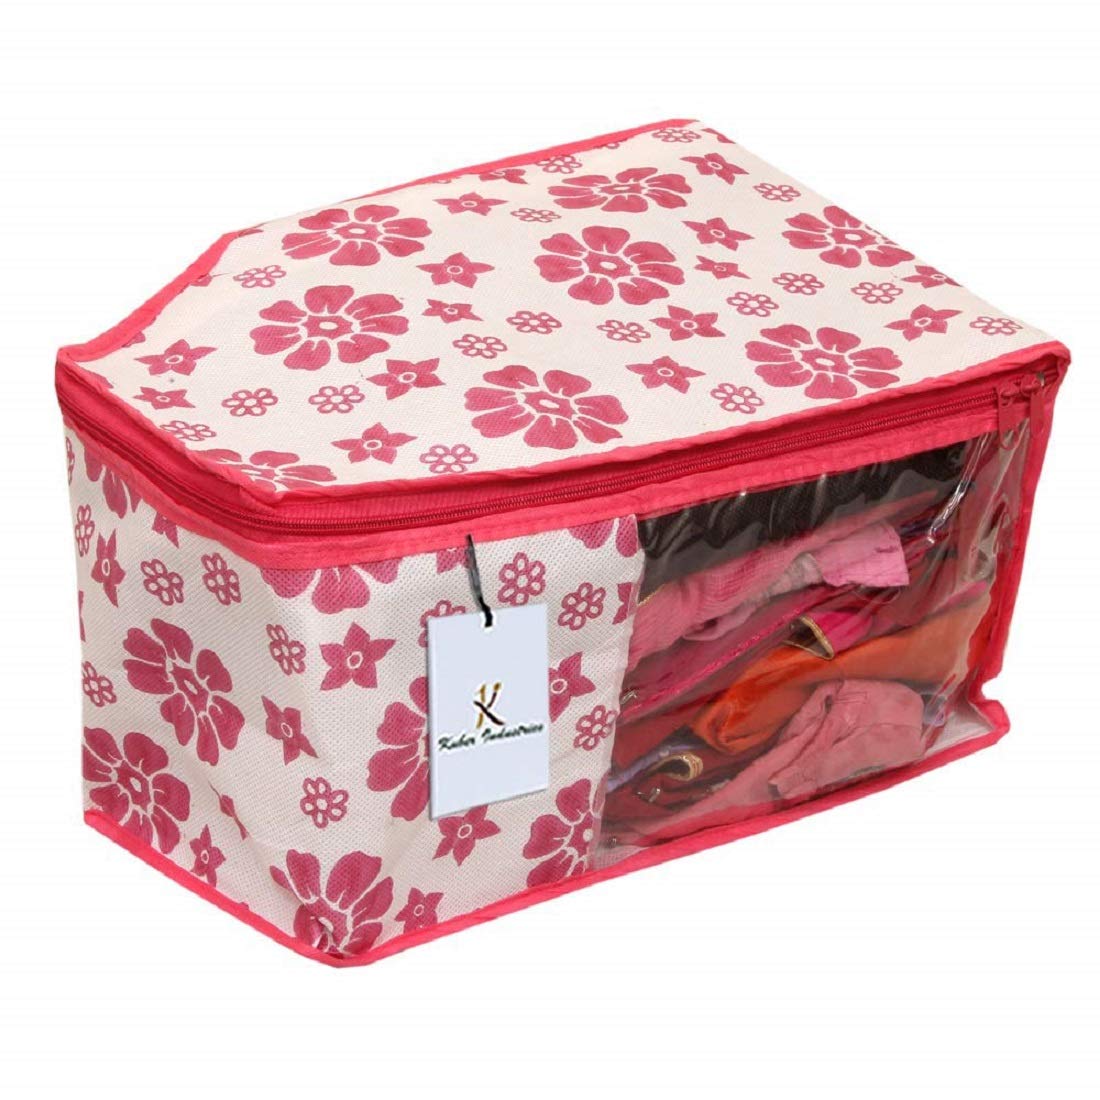 Kuber Industries Flower Design Non Woven 4 Piece Saree Cover/Cloth Wardrobe Organizer and 4 Pieces Blouse Cover Combo Set (Pink) -CTKTC038442